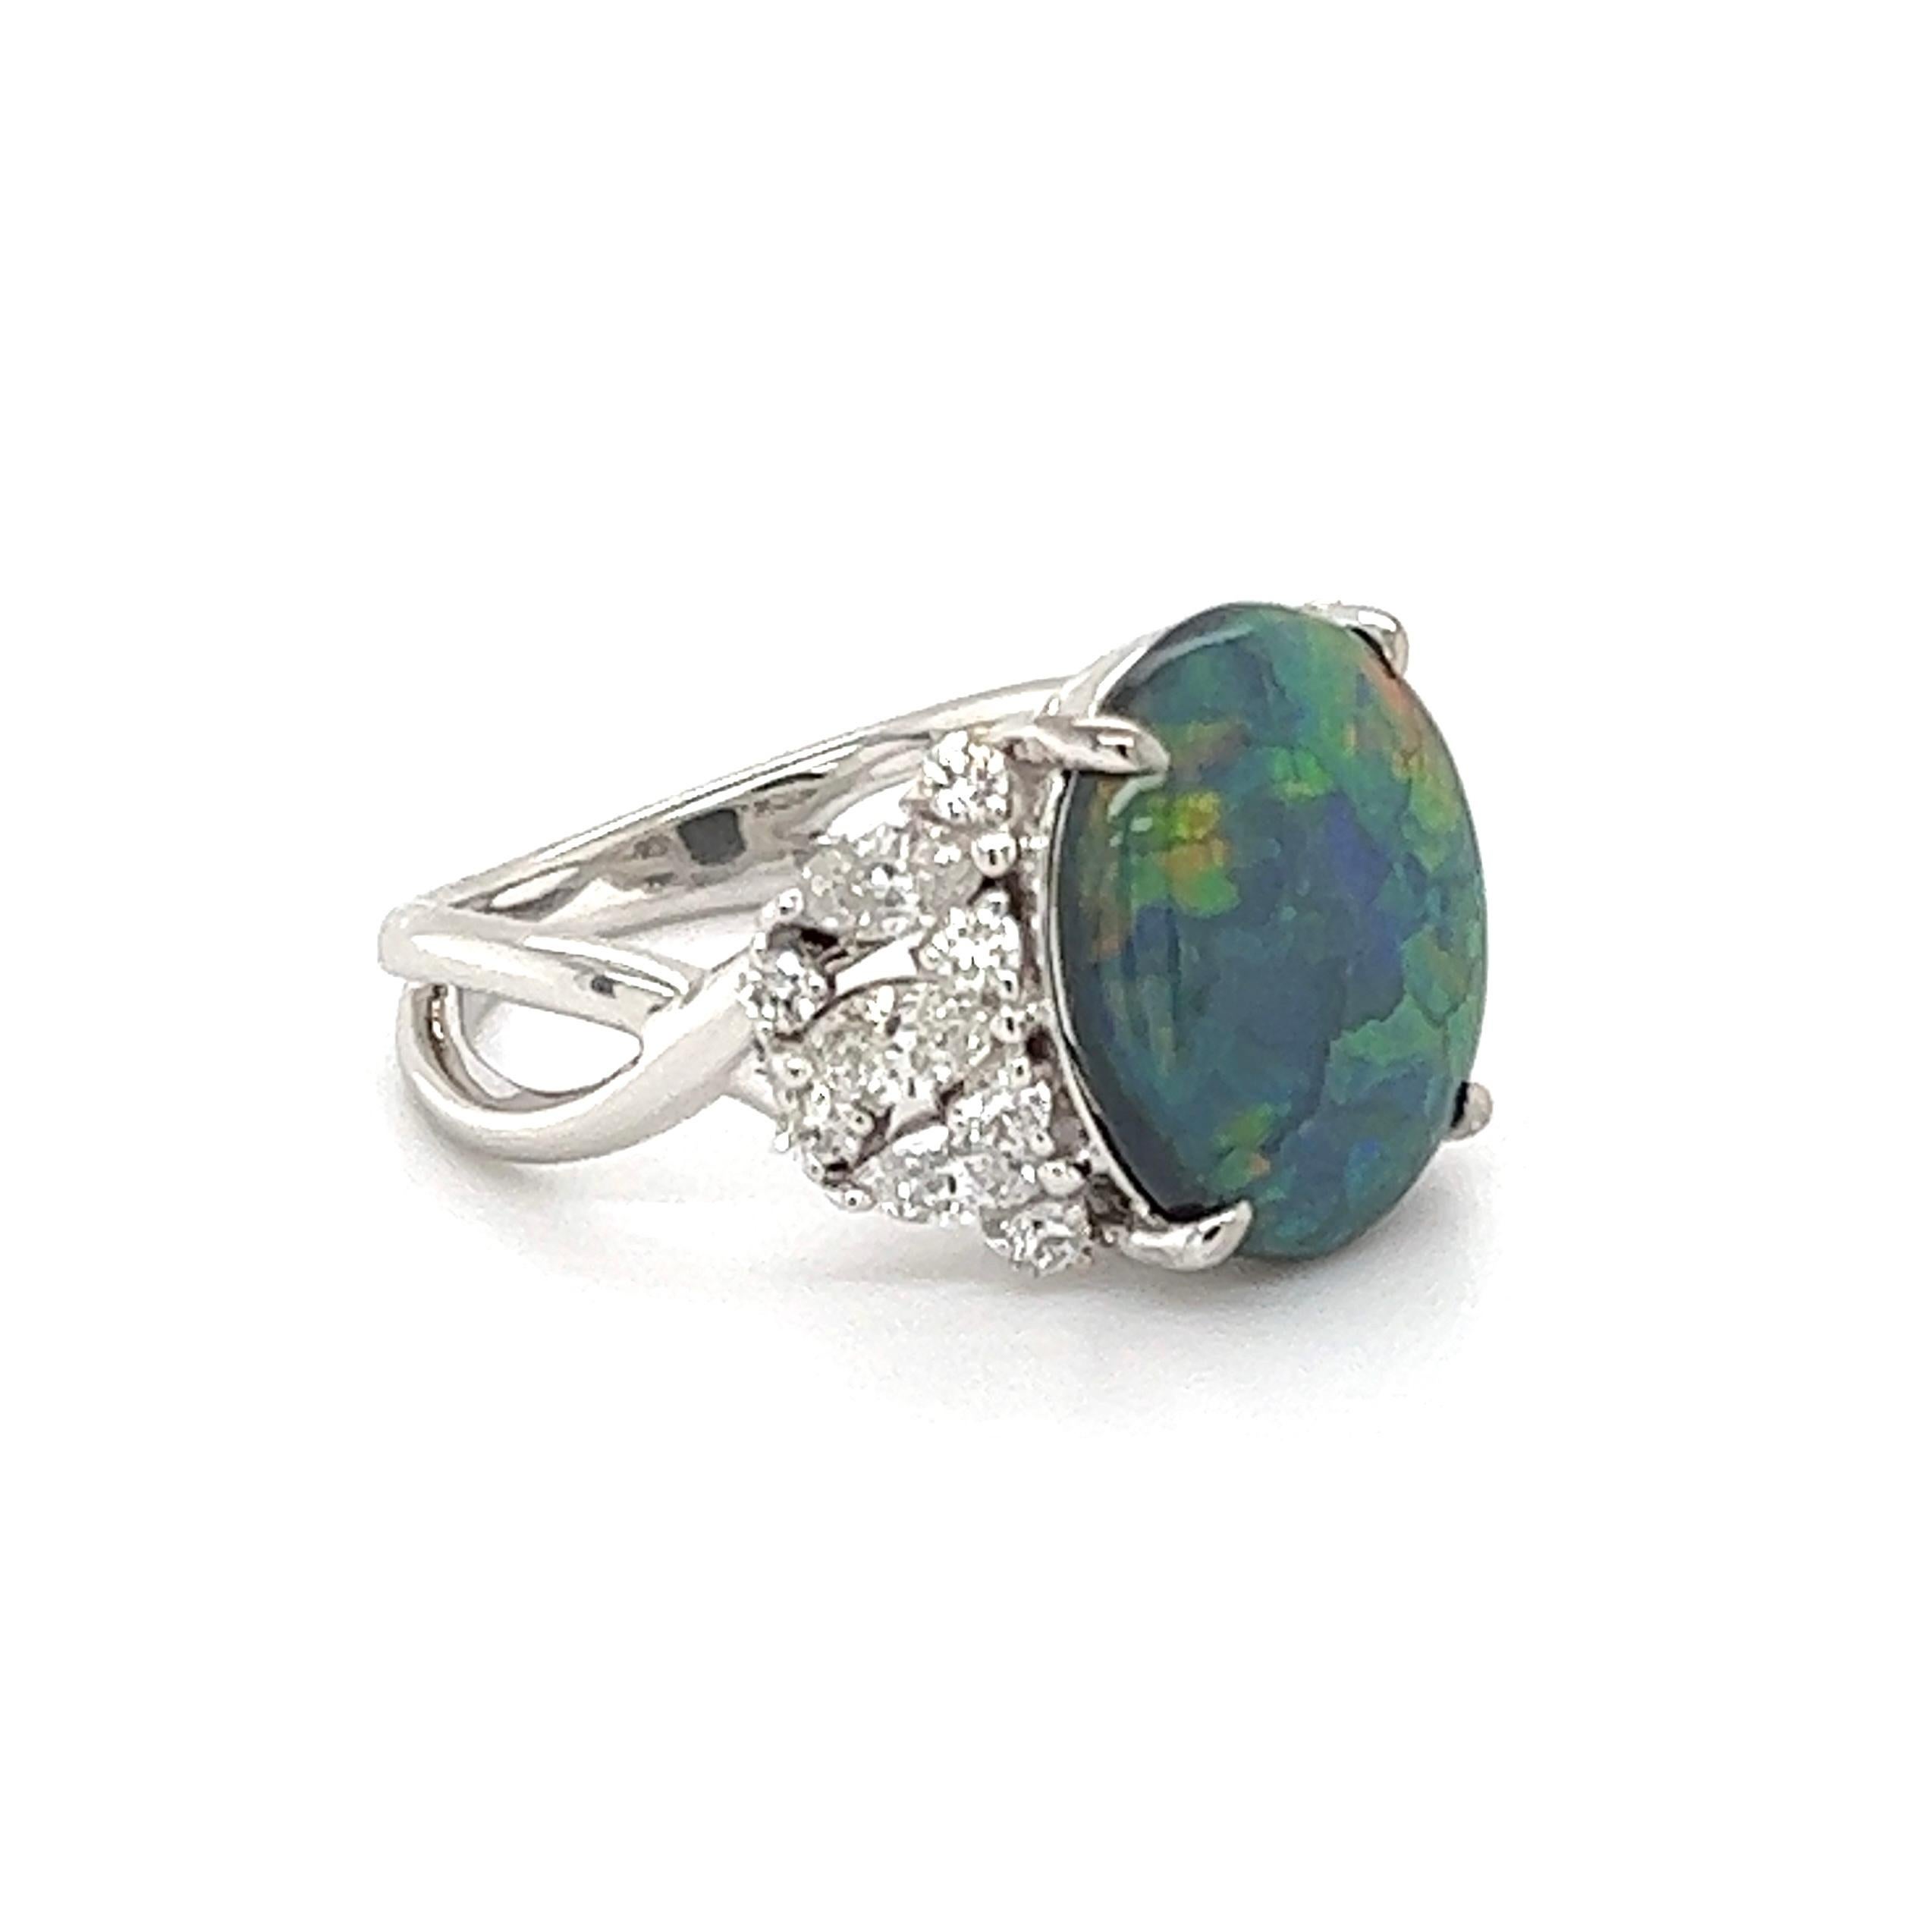 Simply Beautiful and finely detailed Cocktail Ring, center securely set with a 4.69 Carat Lightning Ridge Black Opal, weighing 4.69 Carats, either side set with Diamonds, approx. 0.94 total carat weight. Hand crafted 18K White Gold mounting. Approx.